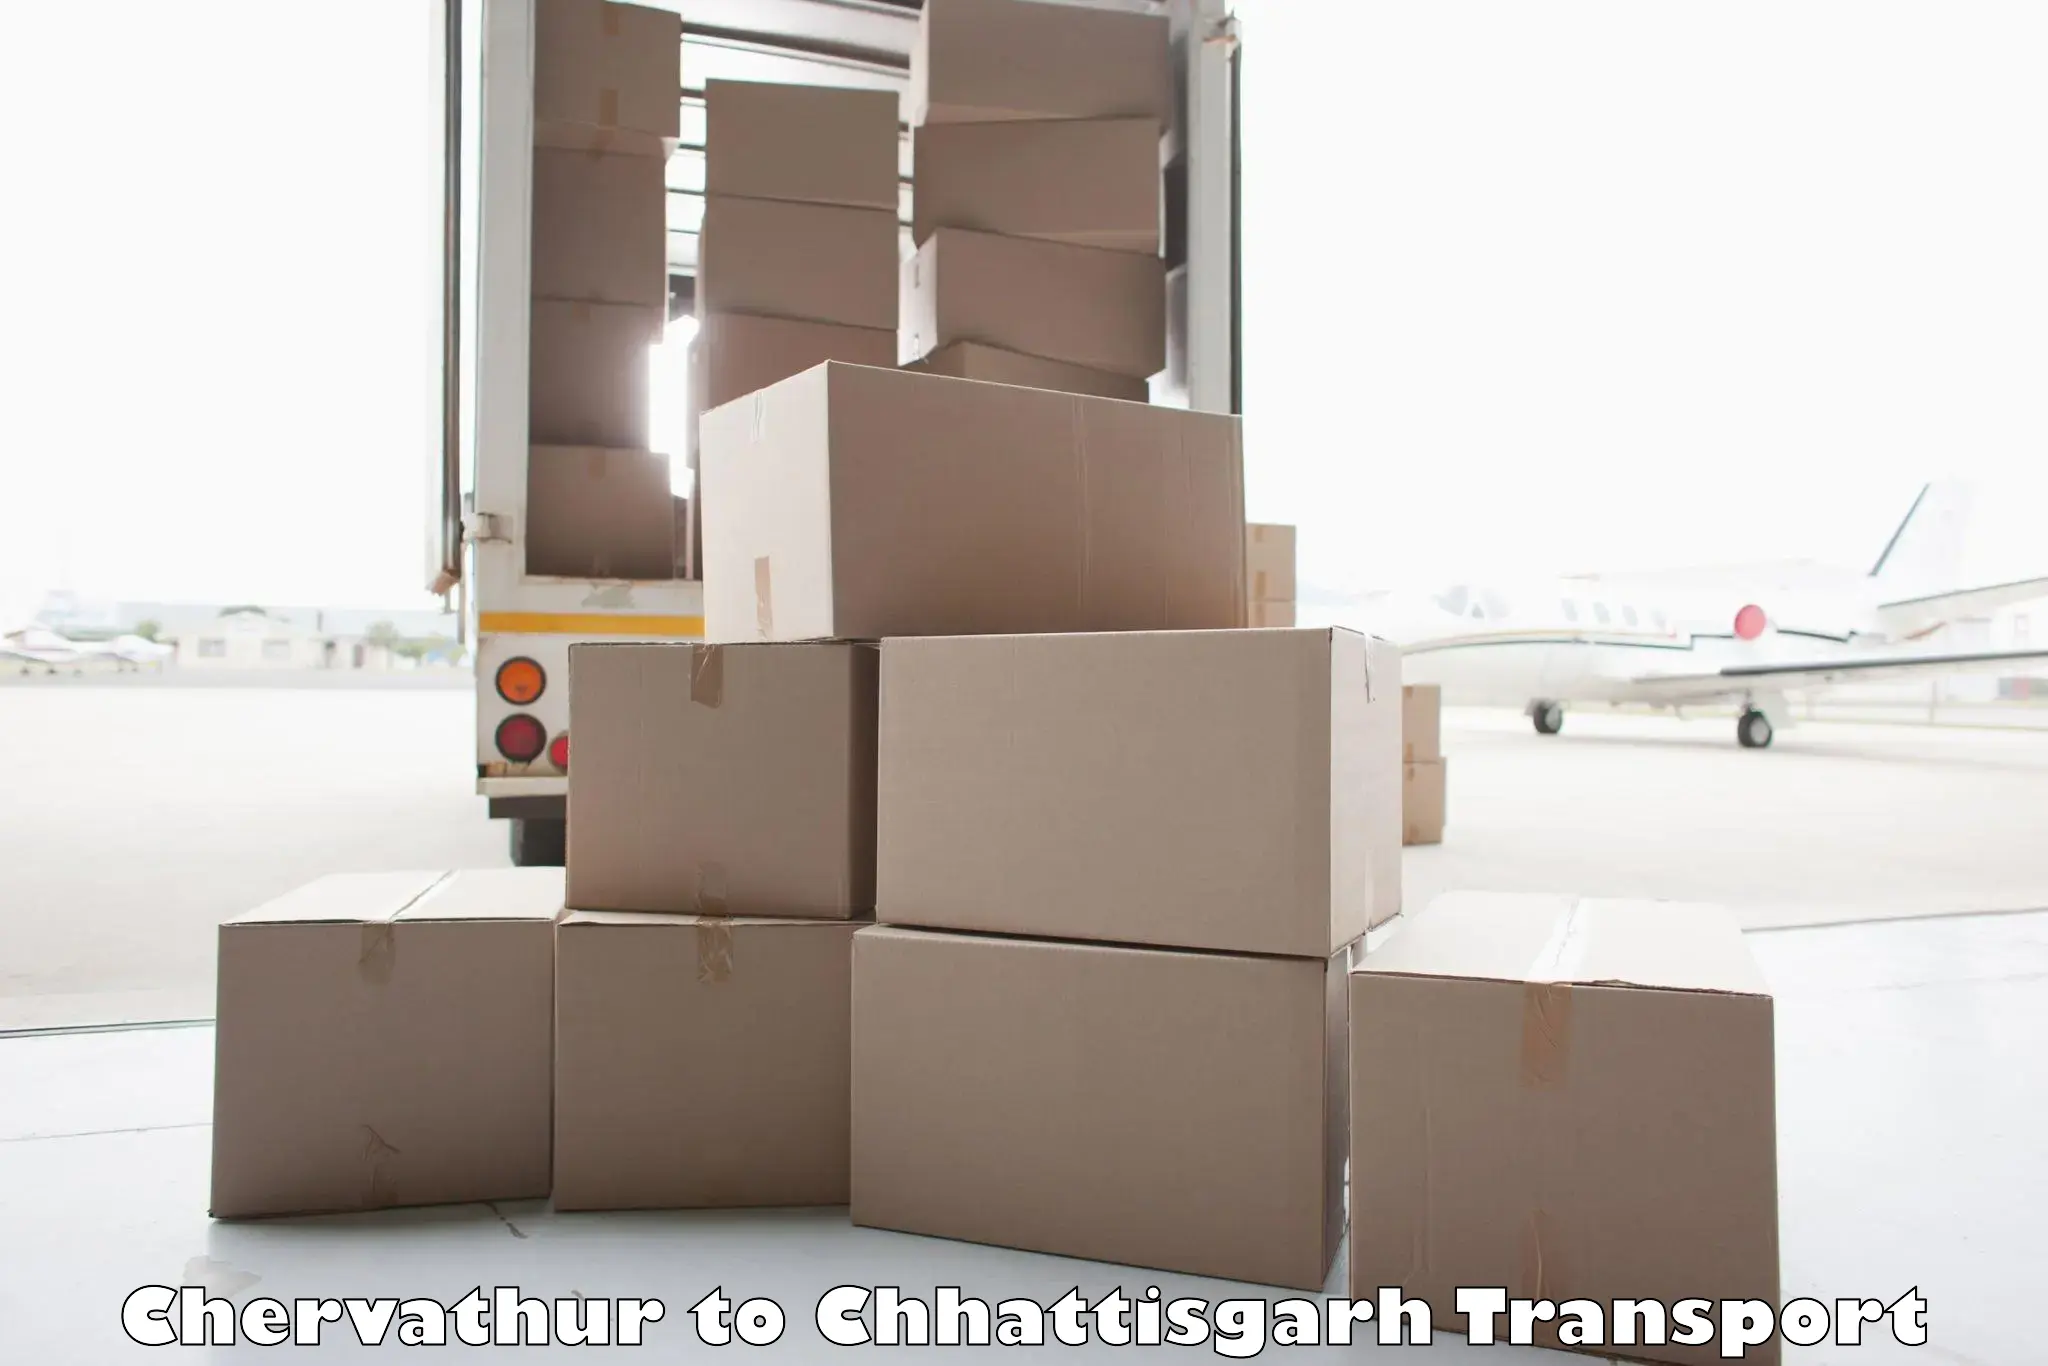 Shipping services Chervathur to Raipur